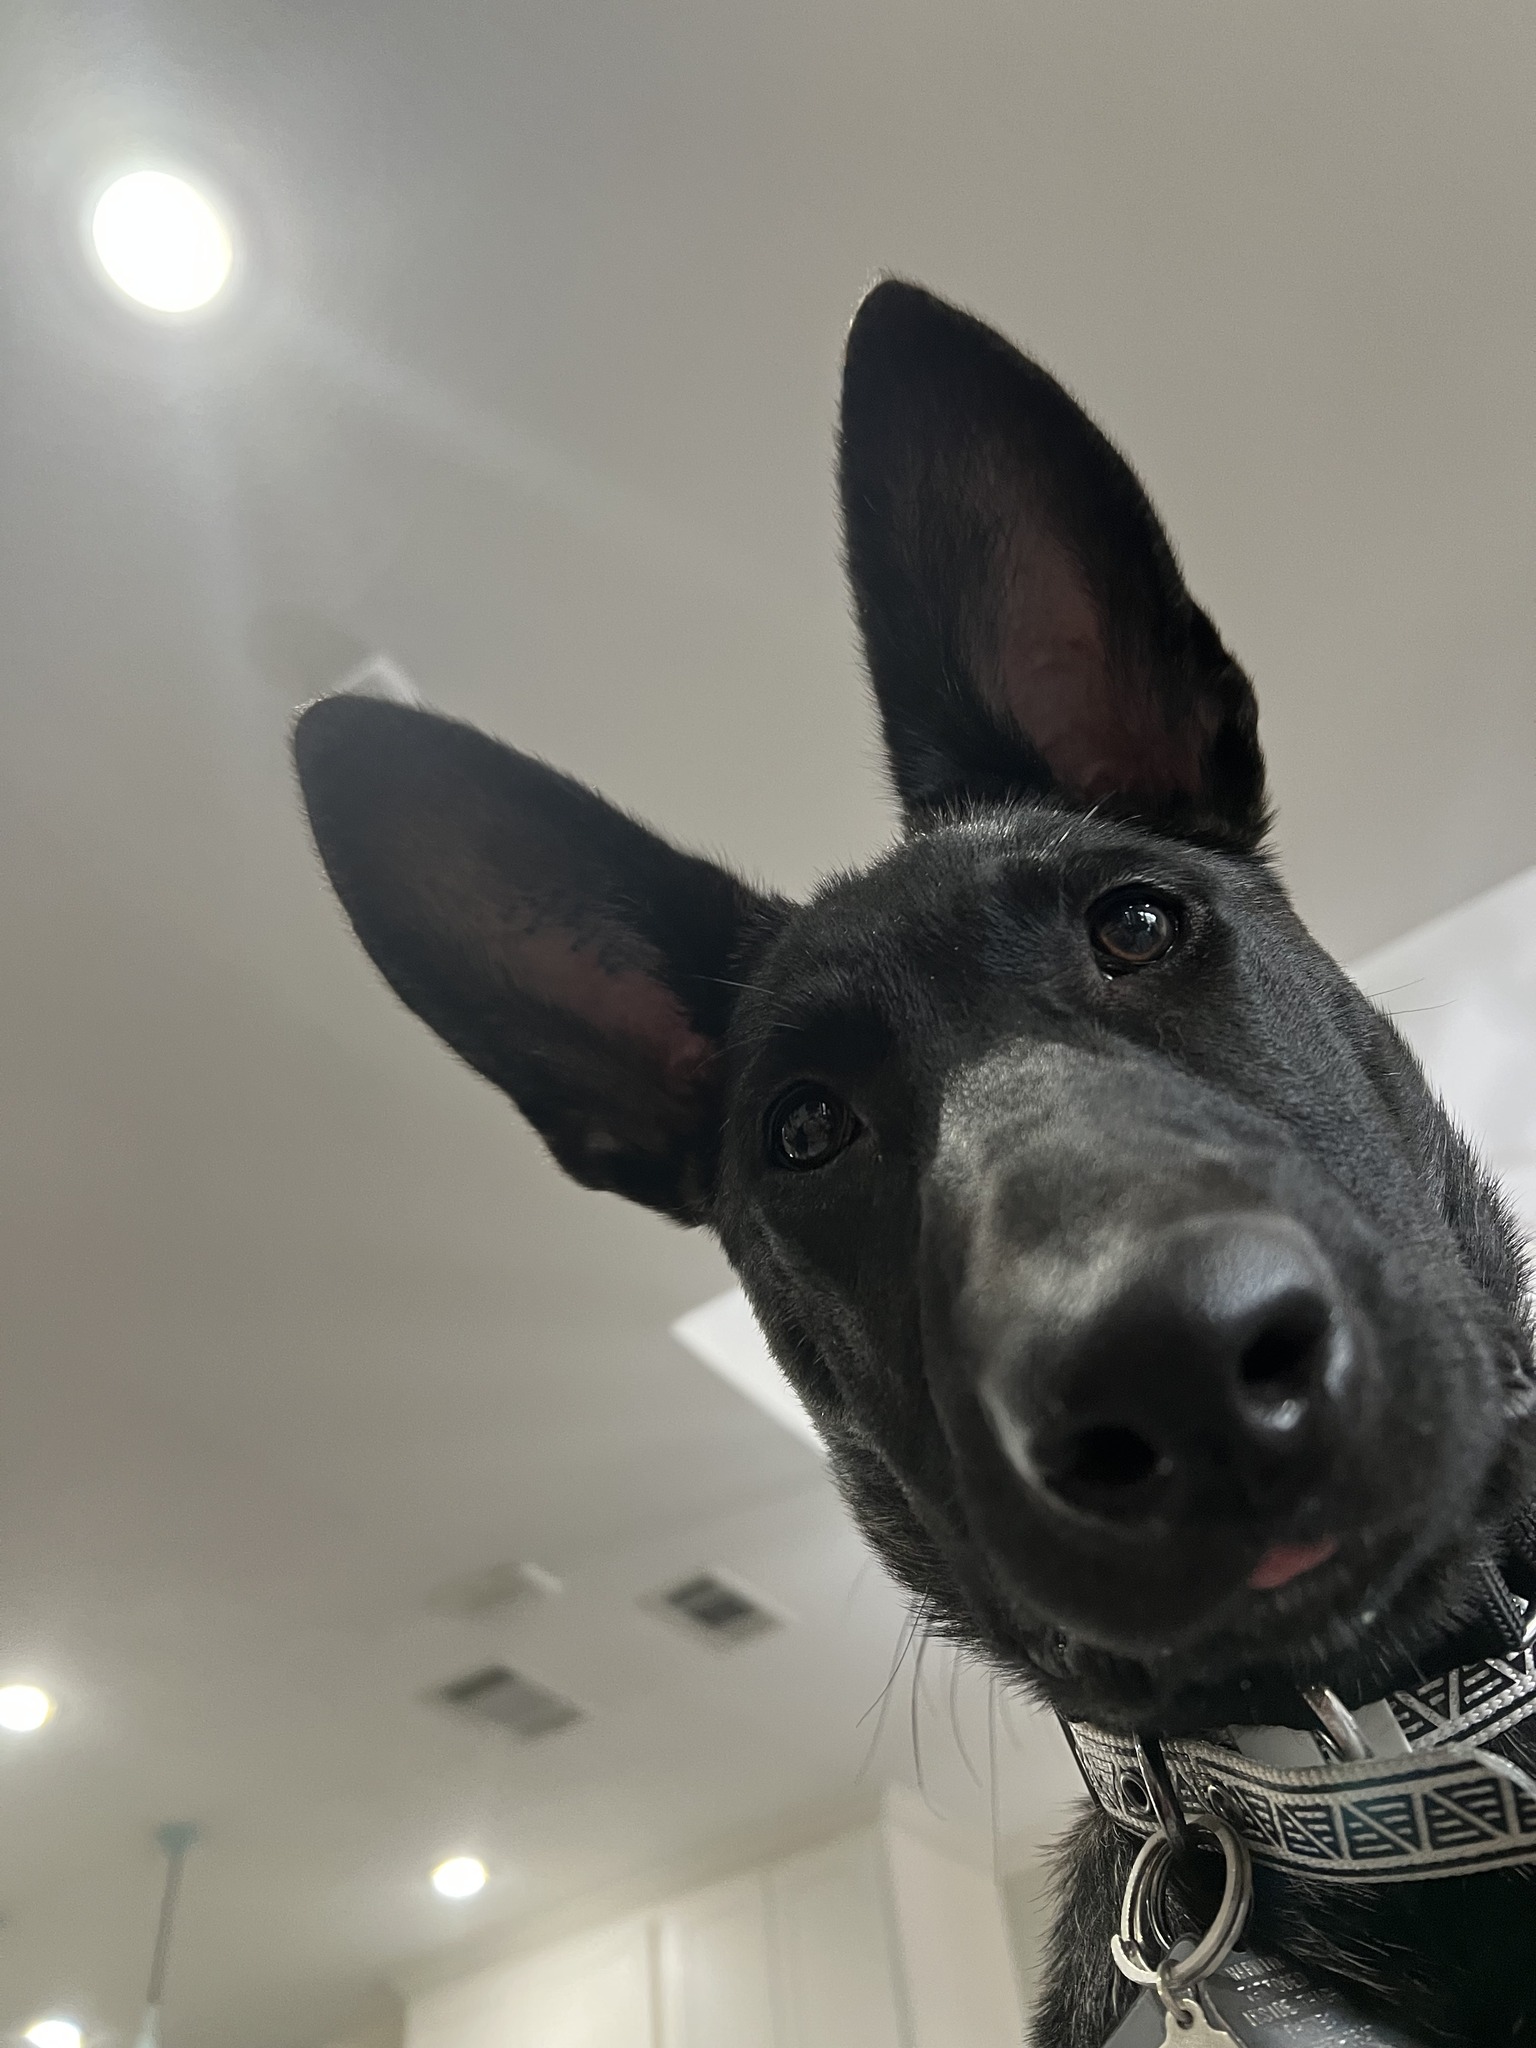 In-Depth K9 Solutions Dog Training Review: The Case of Leia